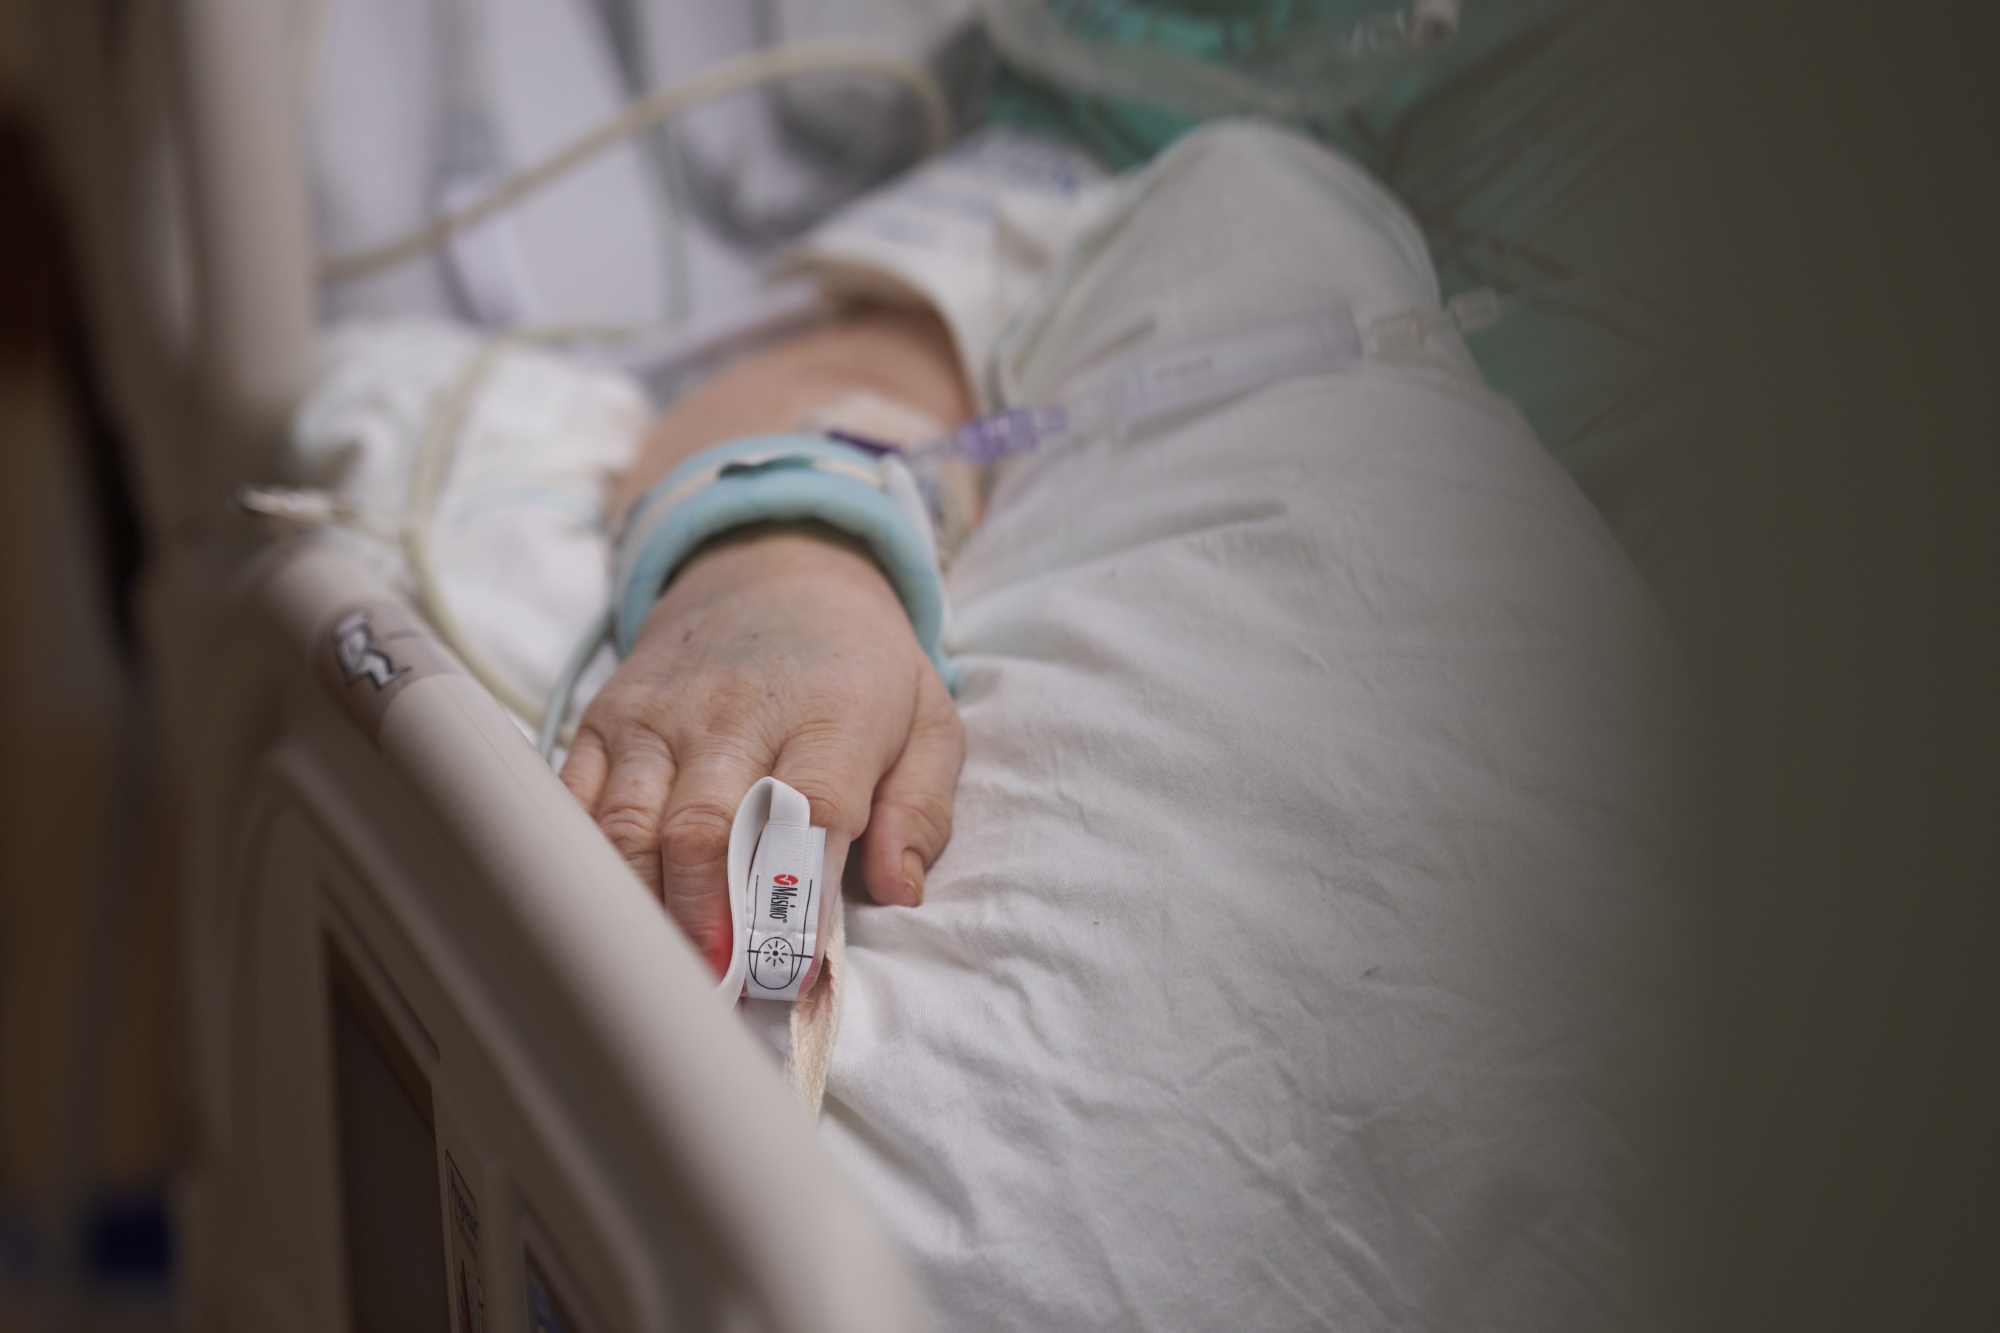 A Covid-19 patient on the Intensive Care Unit floor of a hospital in Connecticut, US.